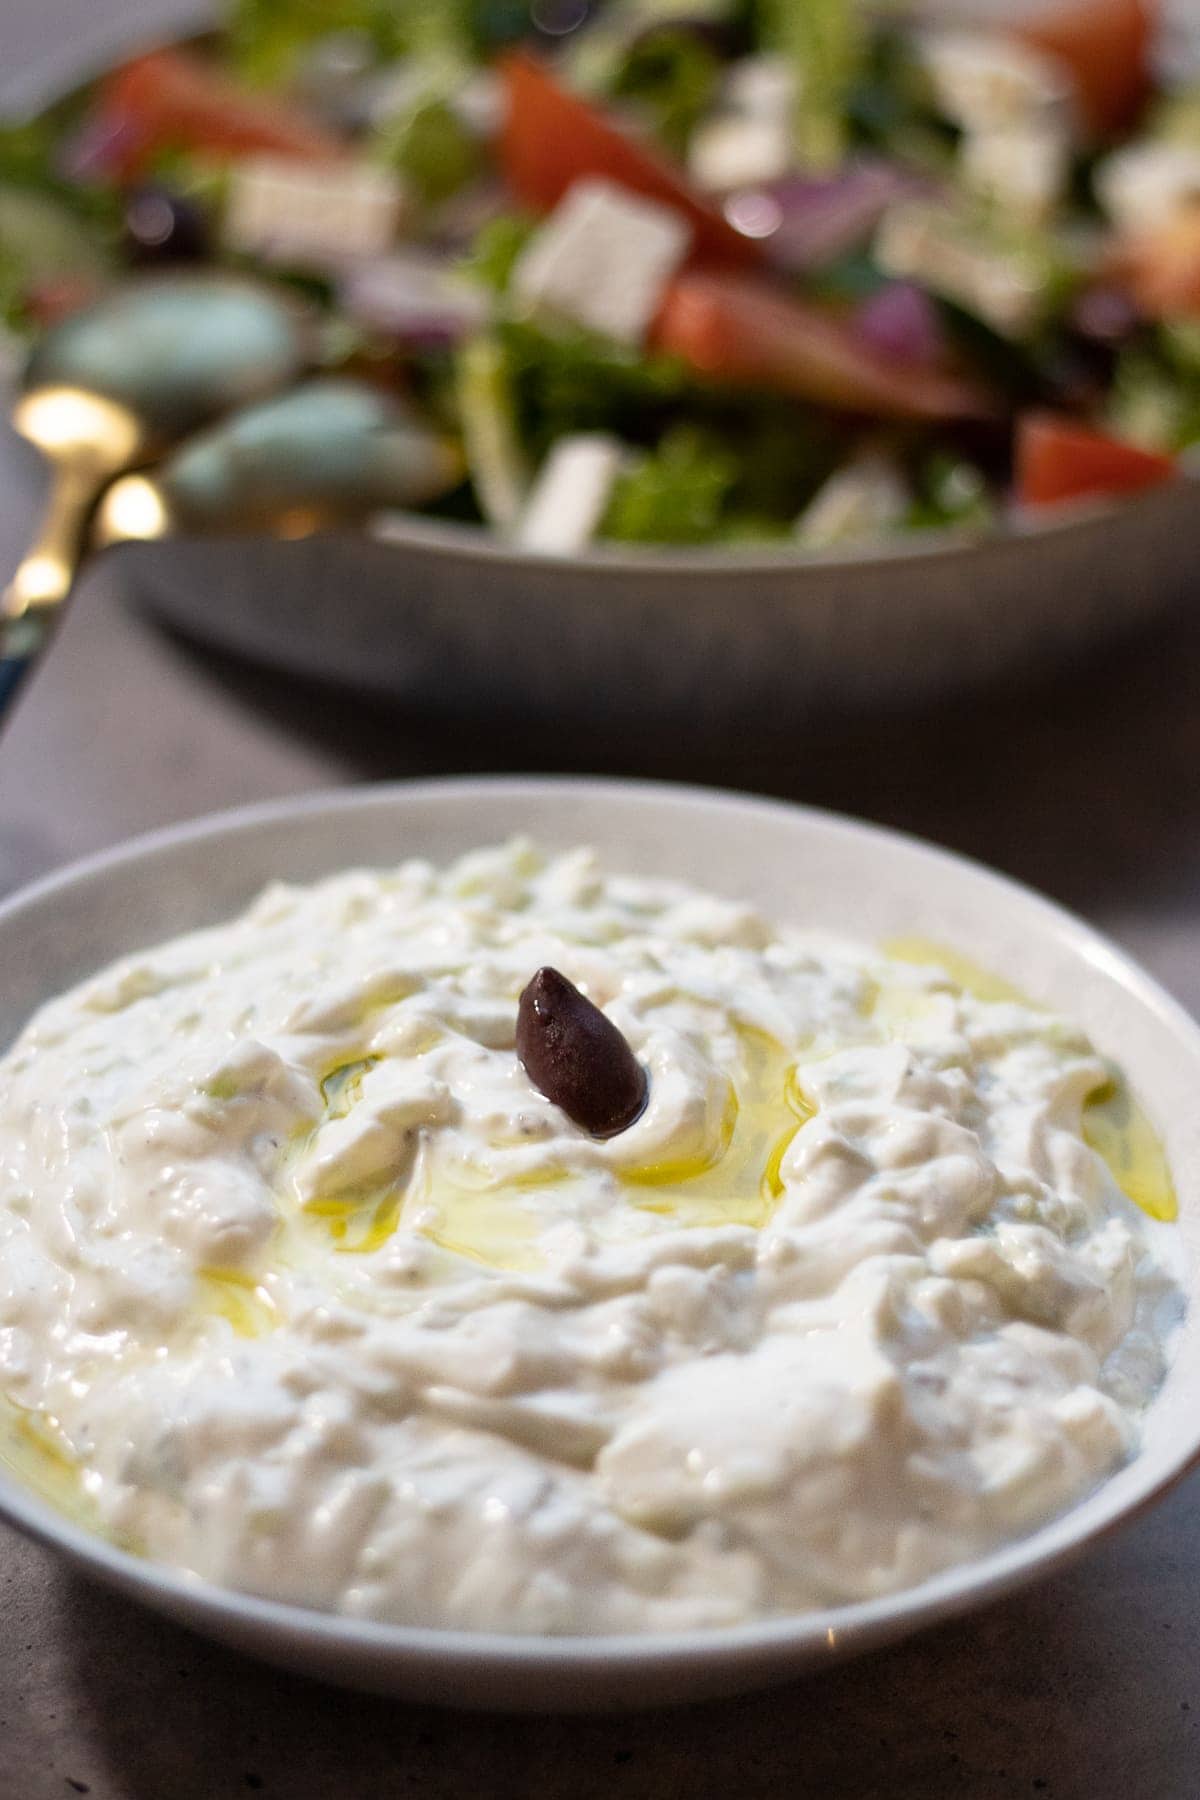 Bowl of tzatziki garnished with an olive and greek salad in the background